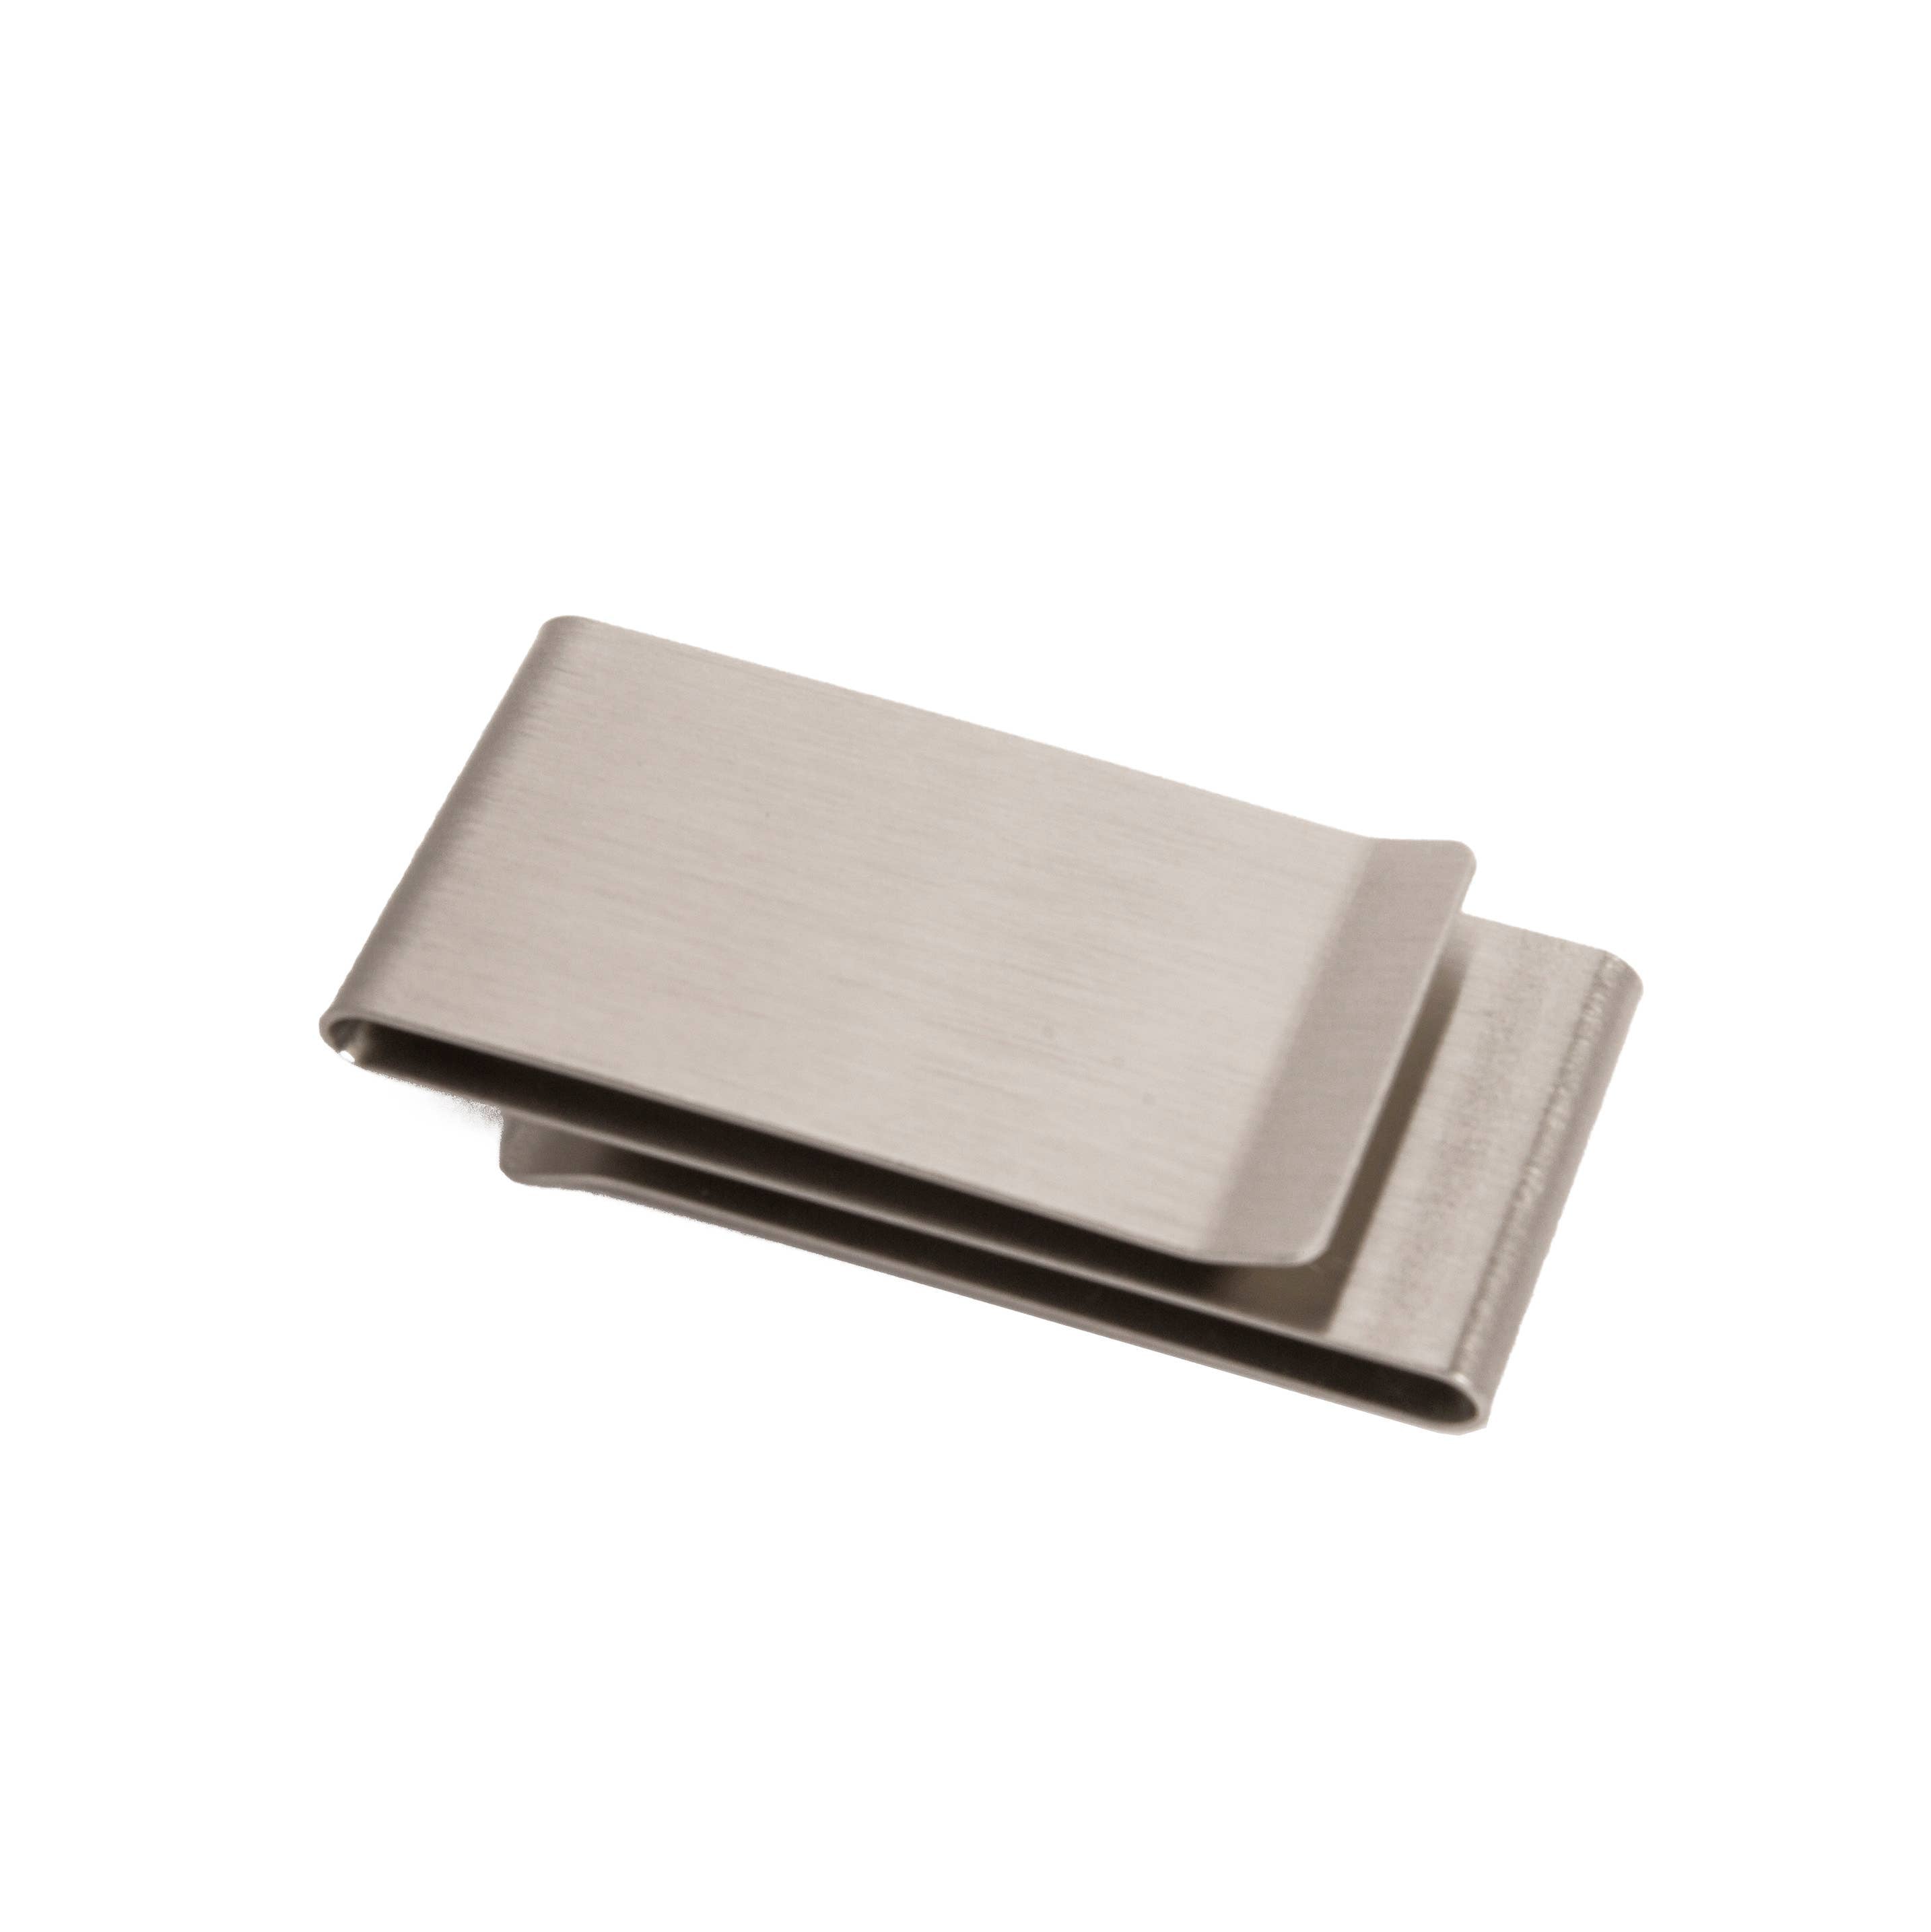 Brouk and Co. - The Mimimal Man's Wallet (Matte Silver)